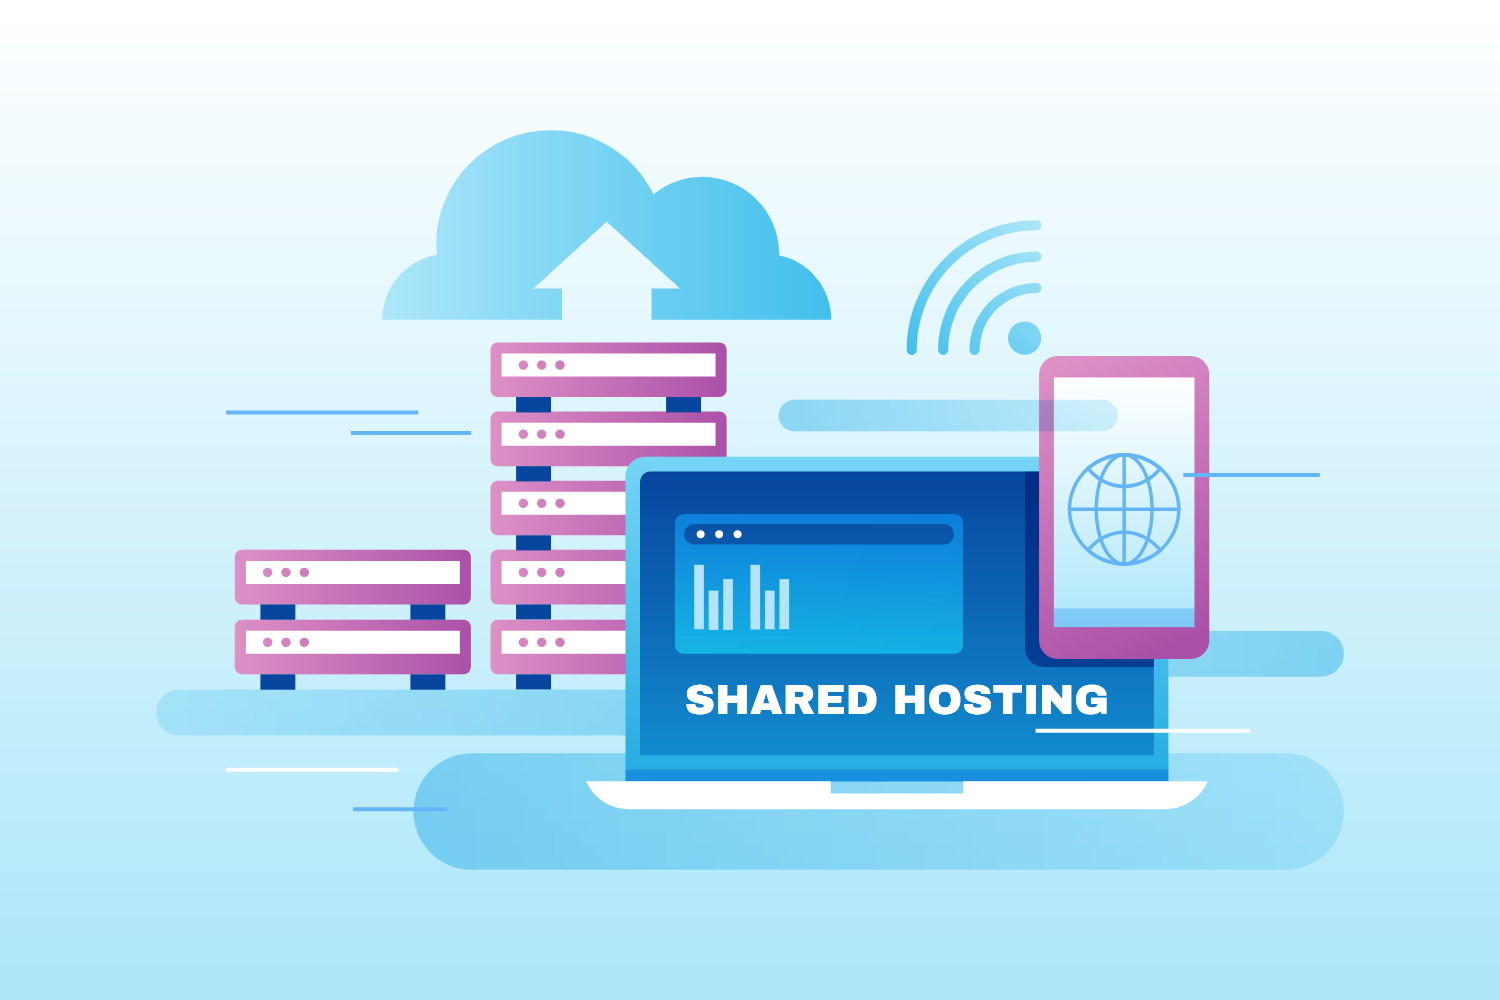 About Shared Hosting in Technical Terms